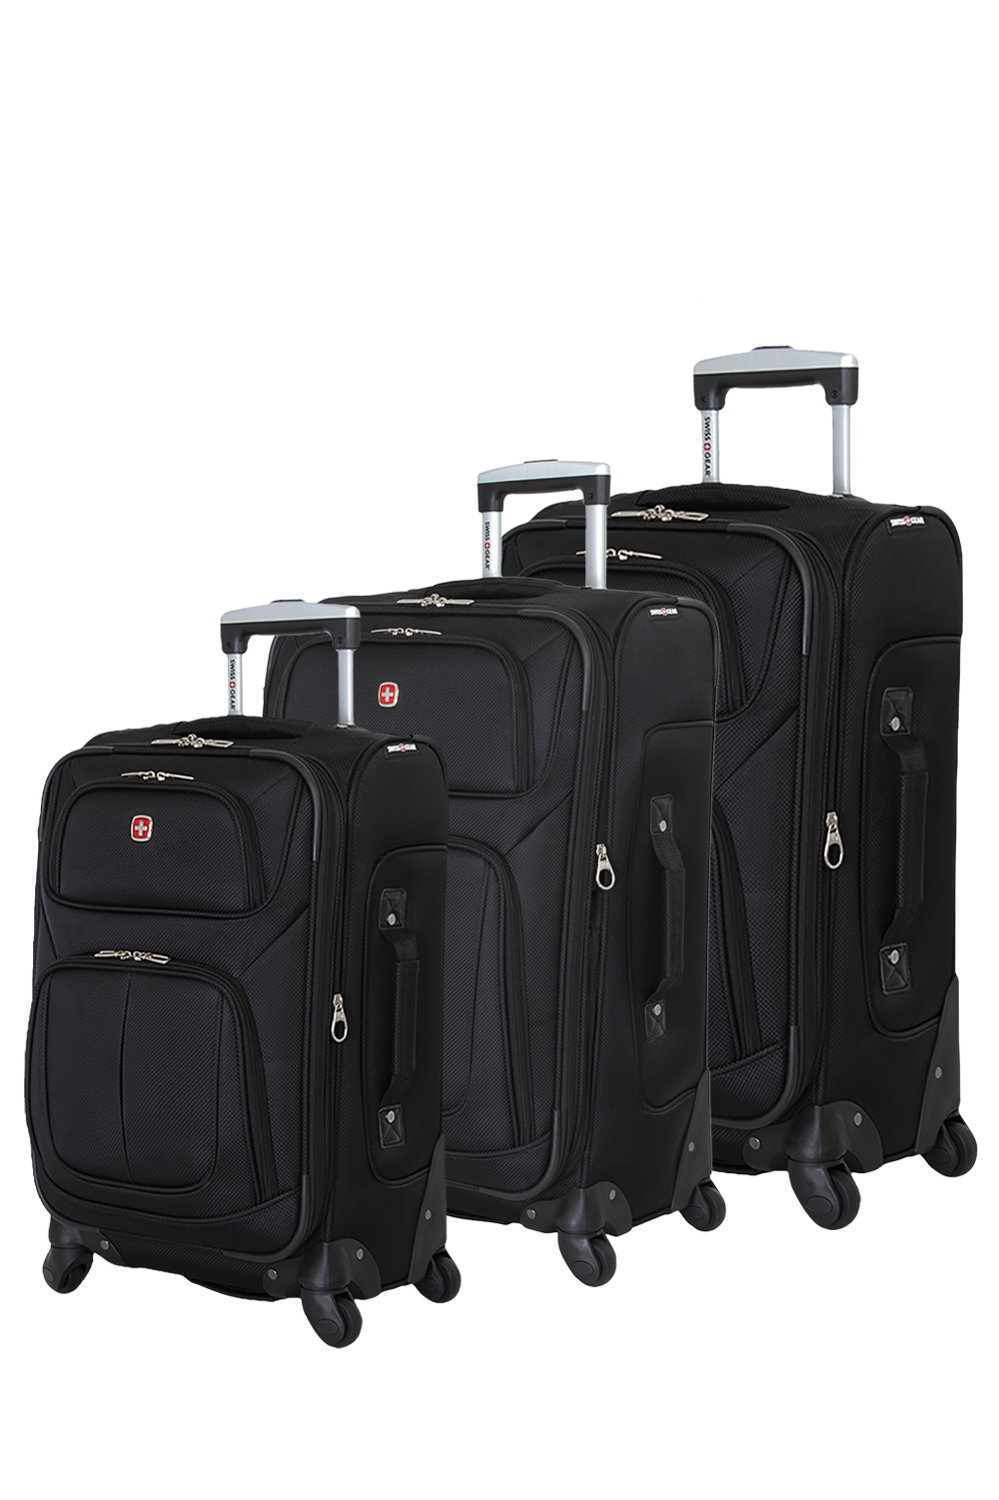 Imported 4 Wheels Trolley Bag Set of 3, For Tour, Size: 20